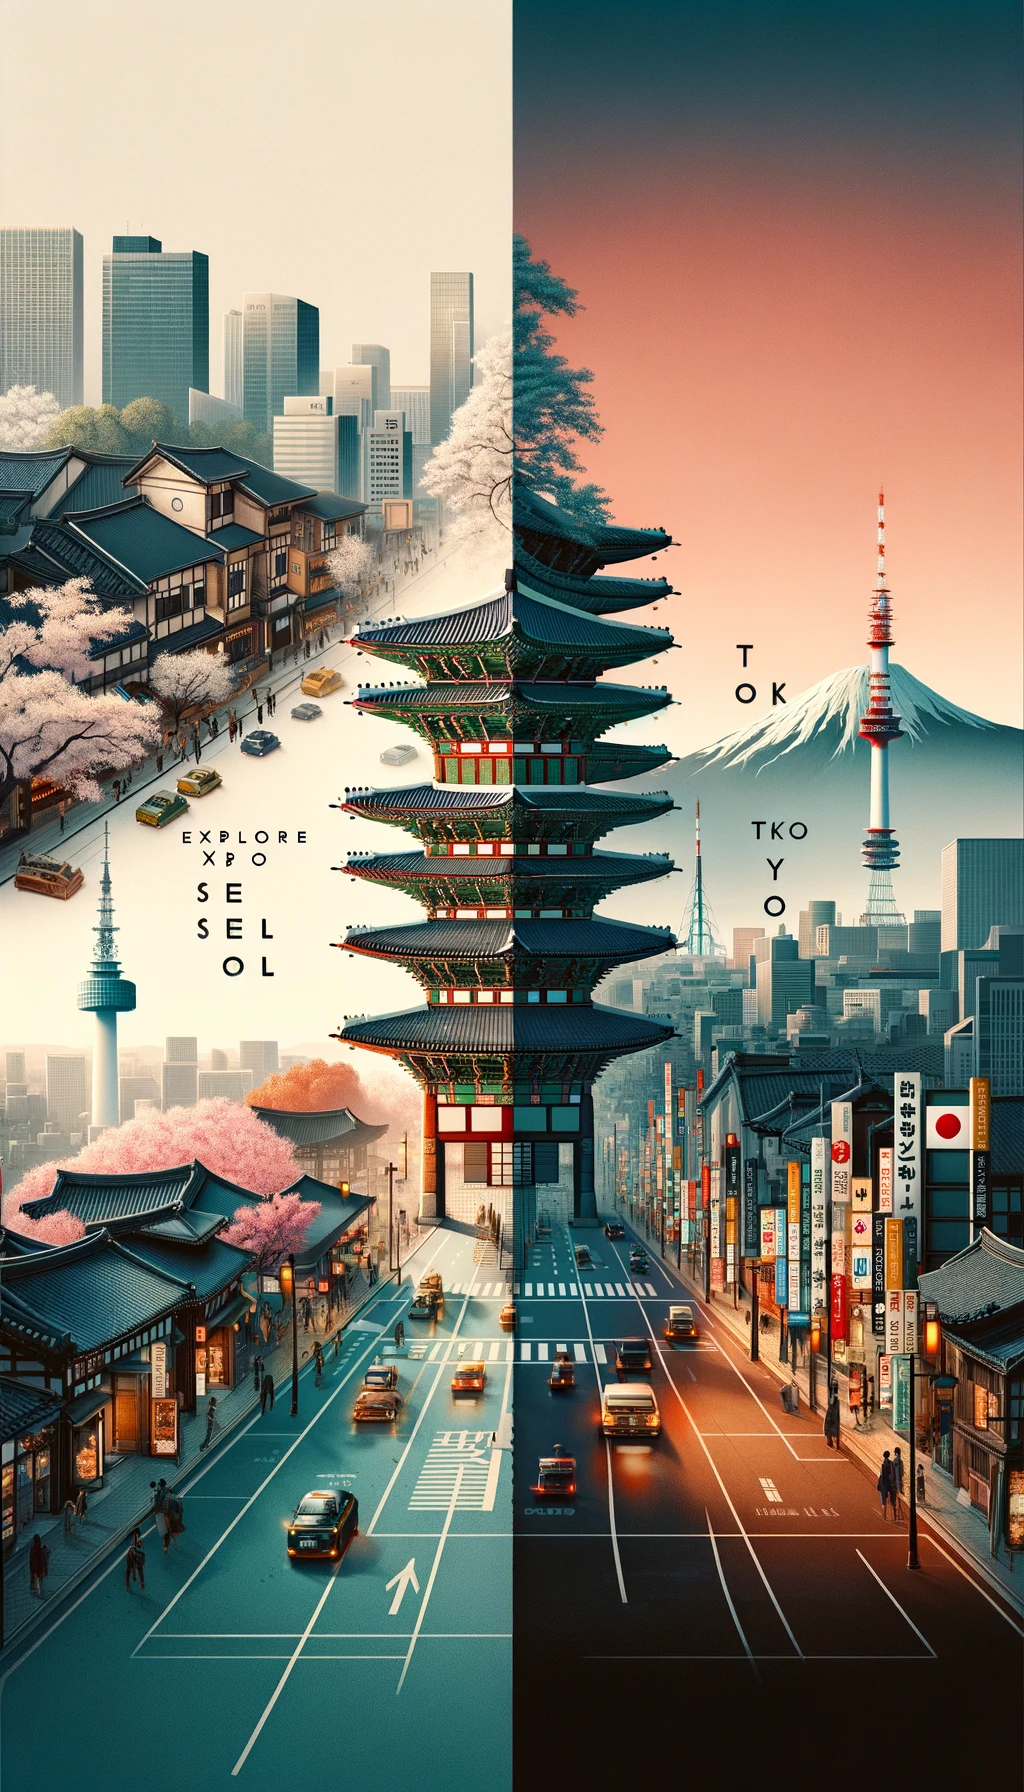 Travel poster for Seoul and Tokyo